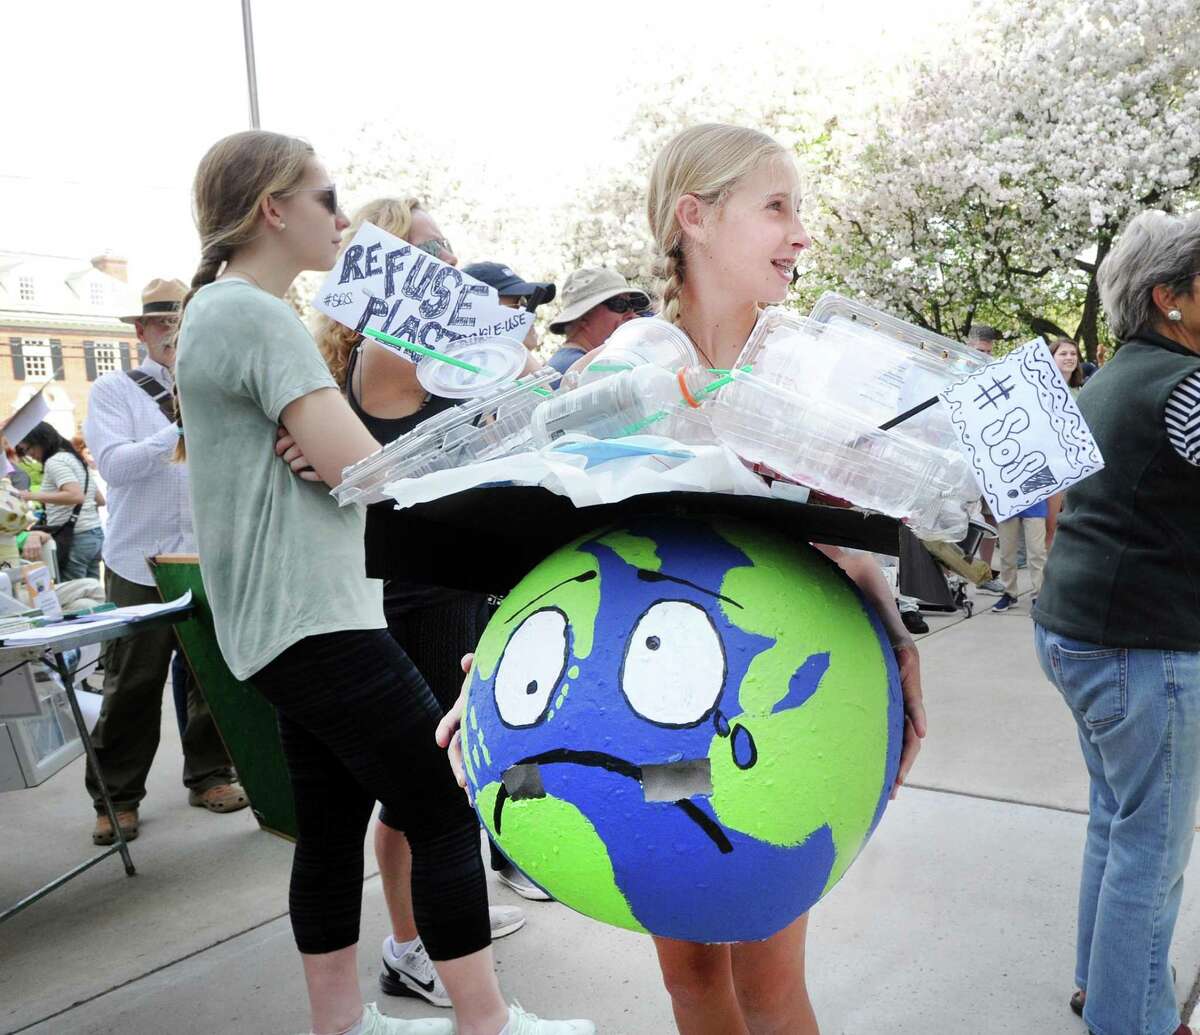 Milli Getz, 13, of Greenwich, wore a distressed Earth costume that she made during the Children's Environmental March at Greenwich Town Hall, Greenwich, Conn., Saturday morning, April 29, 2017. The gathering of the young environmentalists and their families coincided with the People's Climate March that was taking place in Washington, D.C.